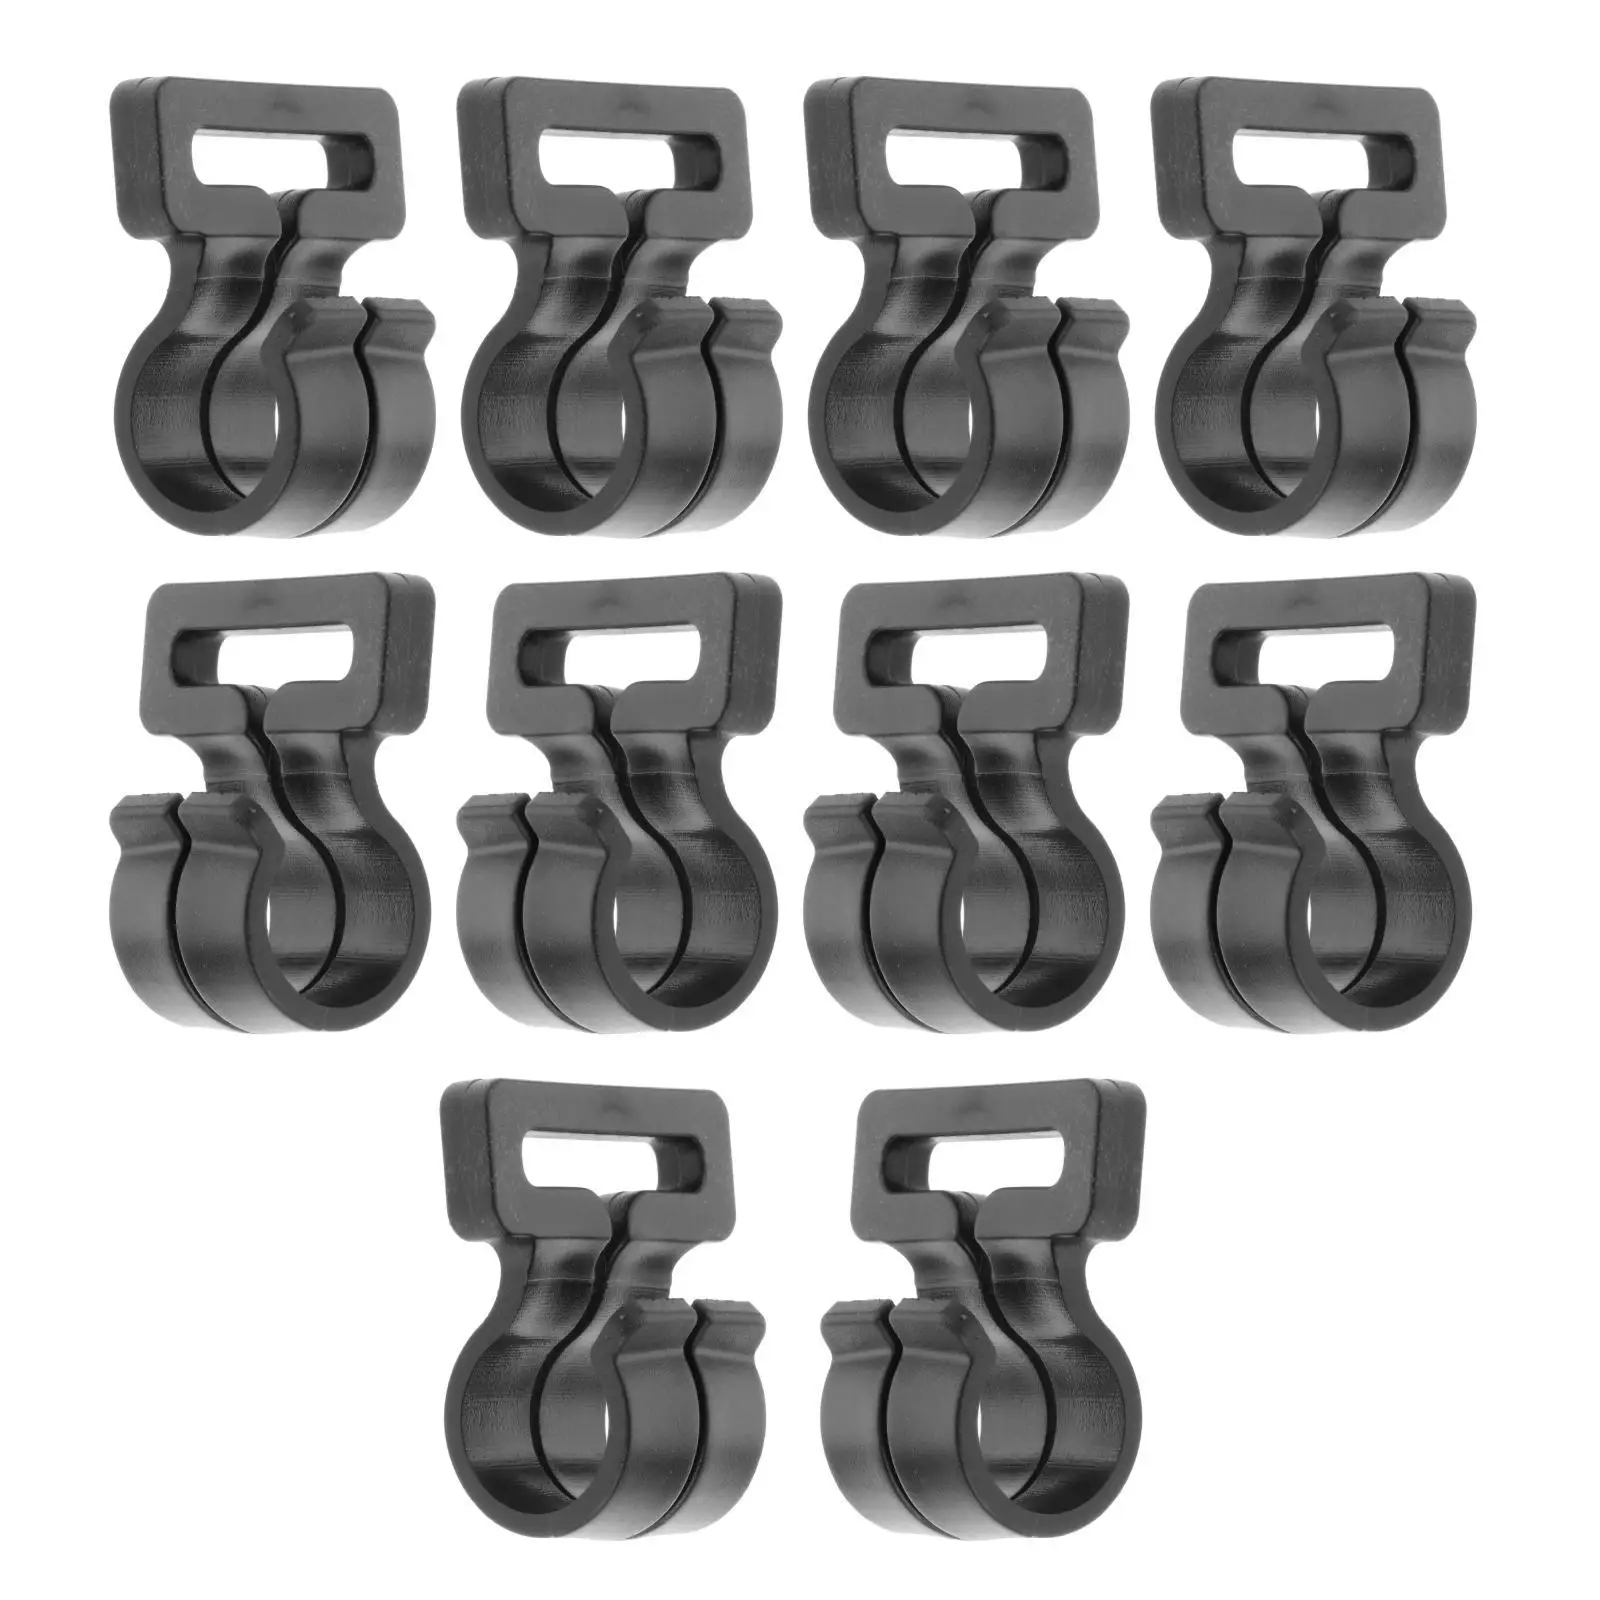 10x Camping Tent Pole Hook Hooks Awning High Quality Nylon Set Post Clips Windproof Inner Tent for Christmas Backpacking Travel